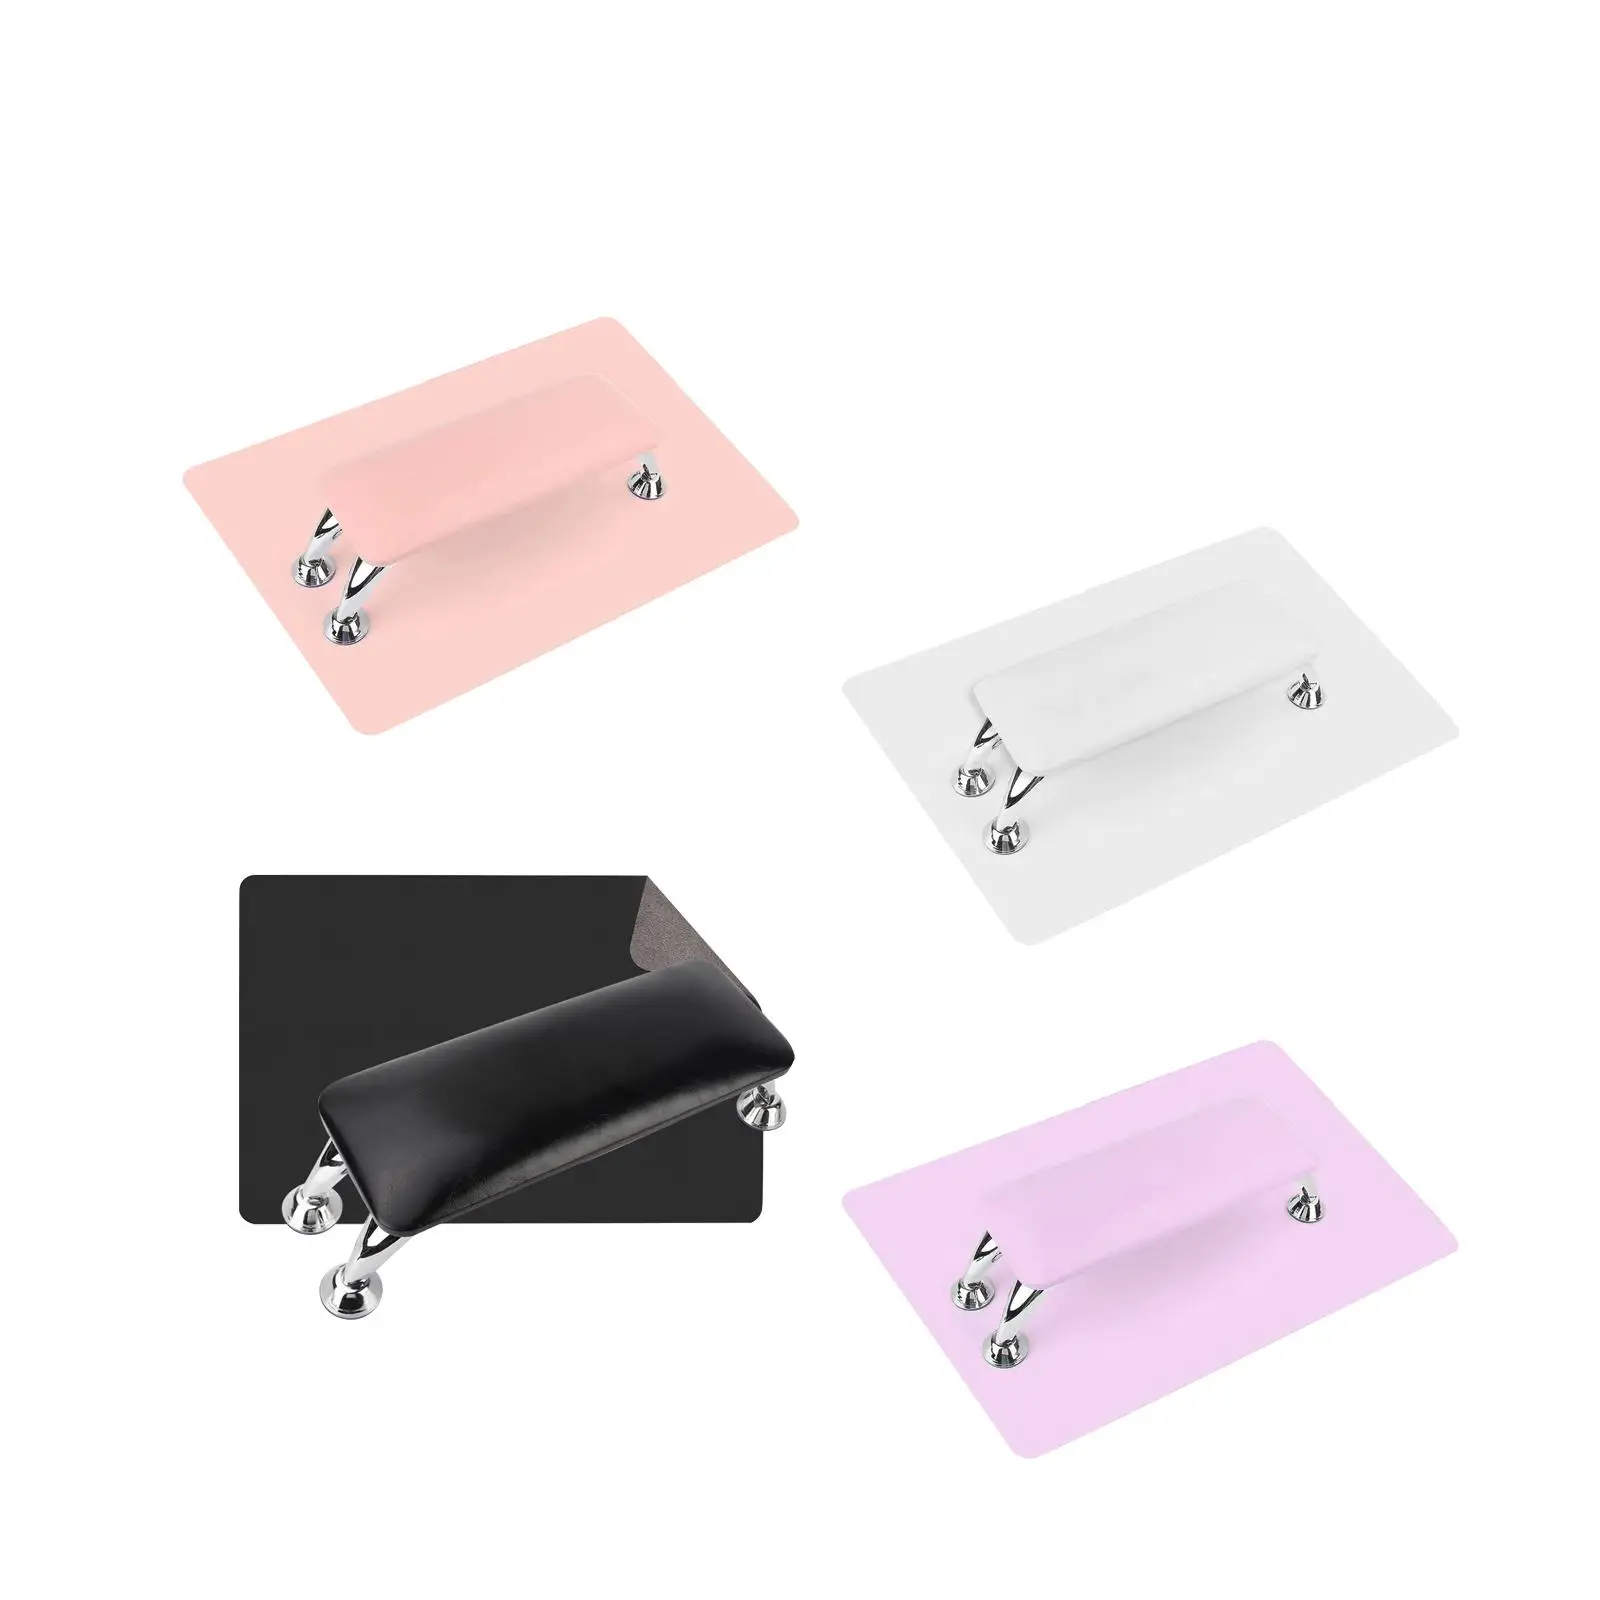 PU Leather Manicure Hand Pillow with Pad Non Slip Soft Professional Nail Rest Cushion Table Desk Station for Salon Acrylic Nails